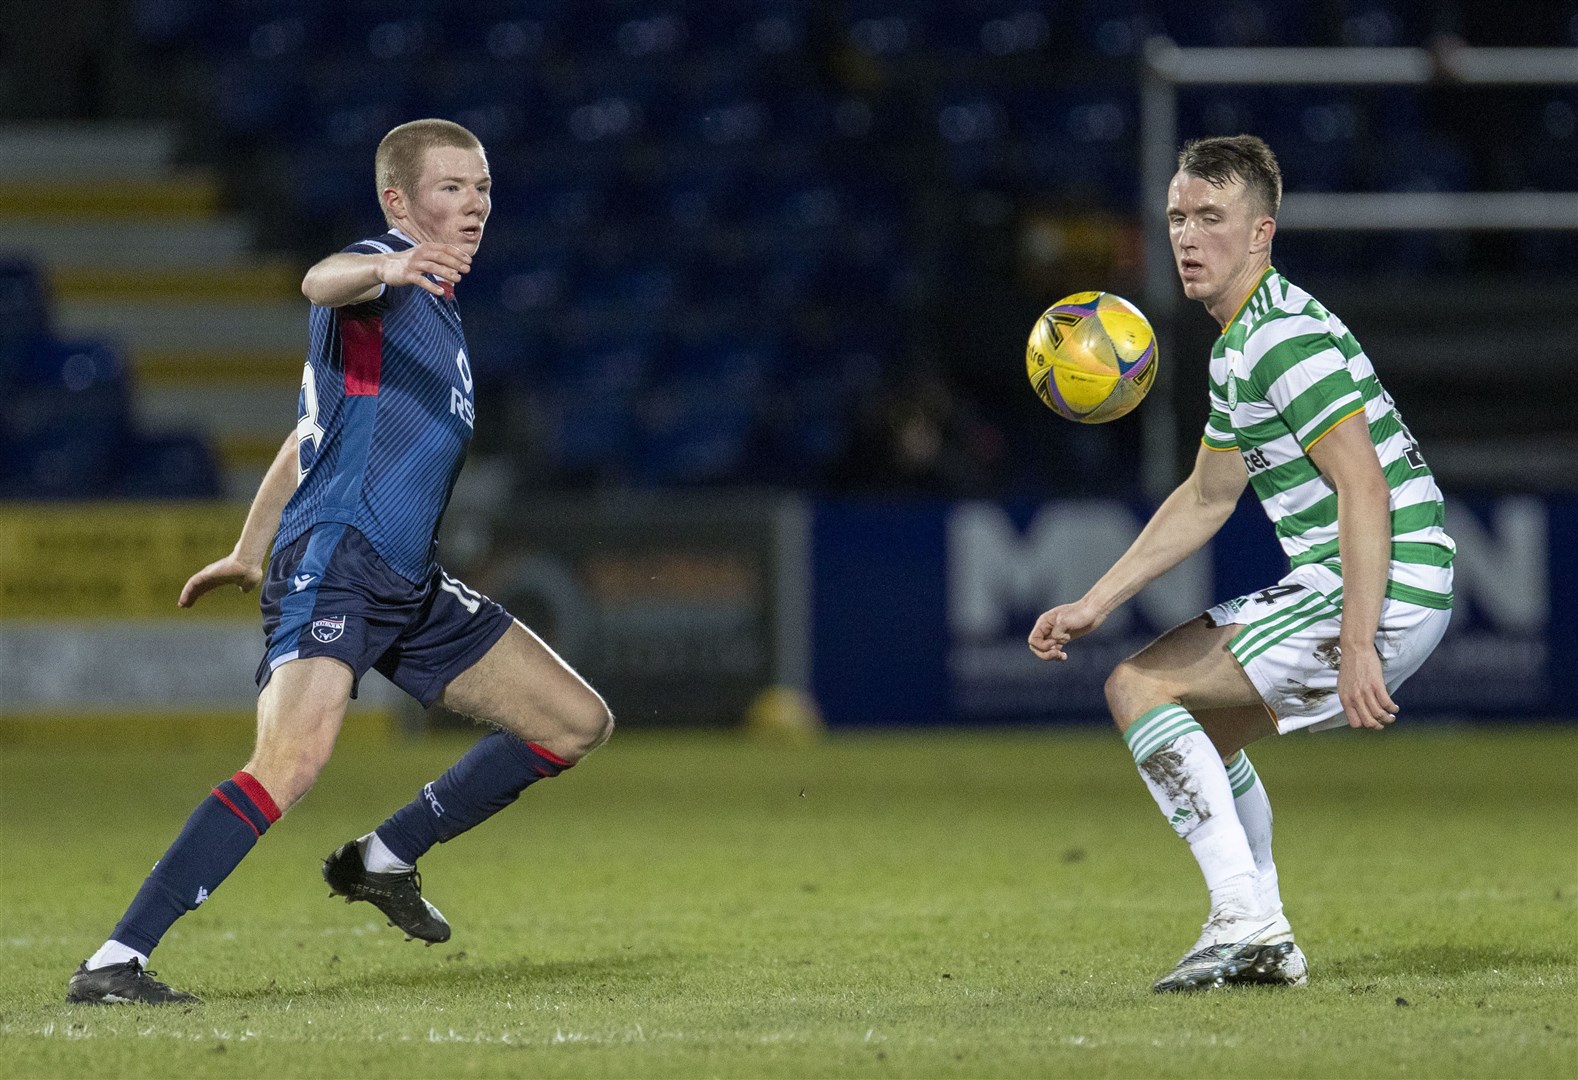 Picture - Ken Macpherson, Inverness. Ross County(1) v Celtic(0). 21.02.21. Ross County's Stephen Kelly clears from Celtic’s David Turnbull.